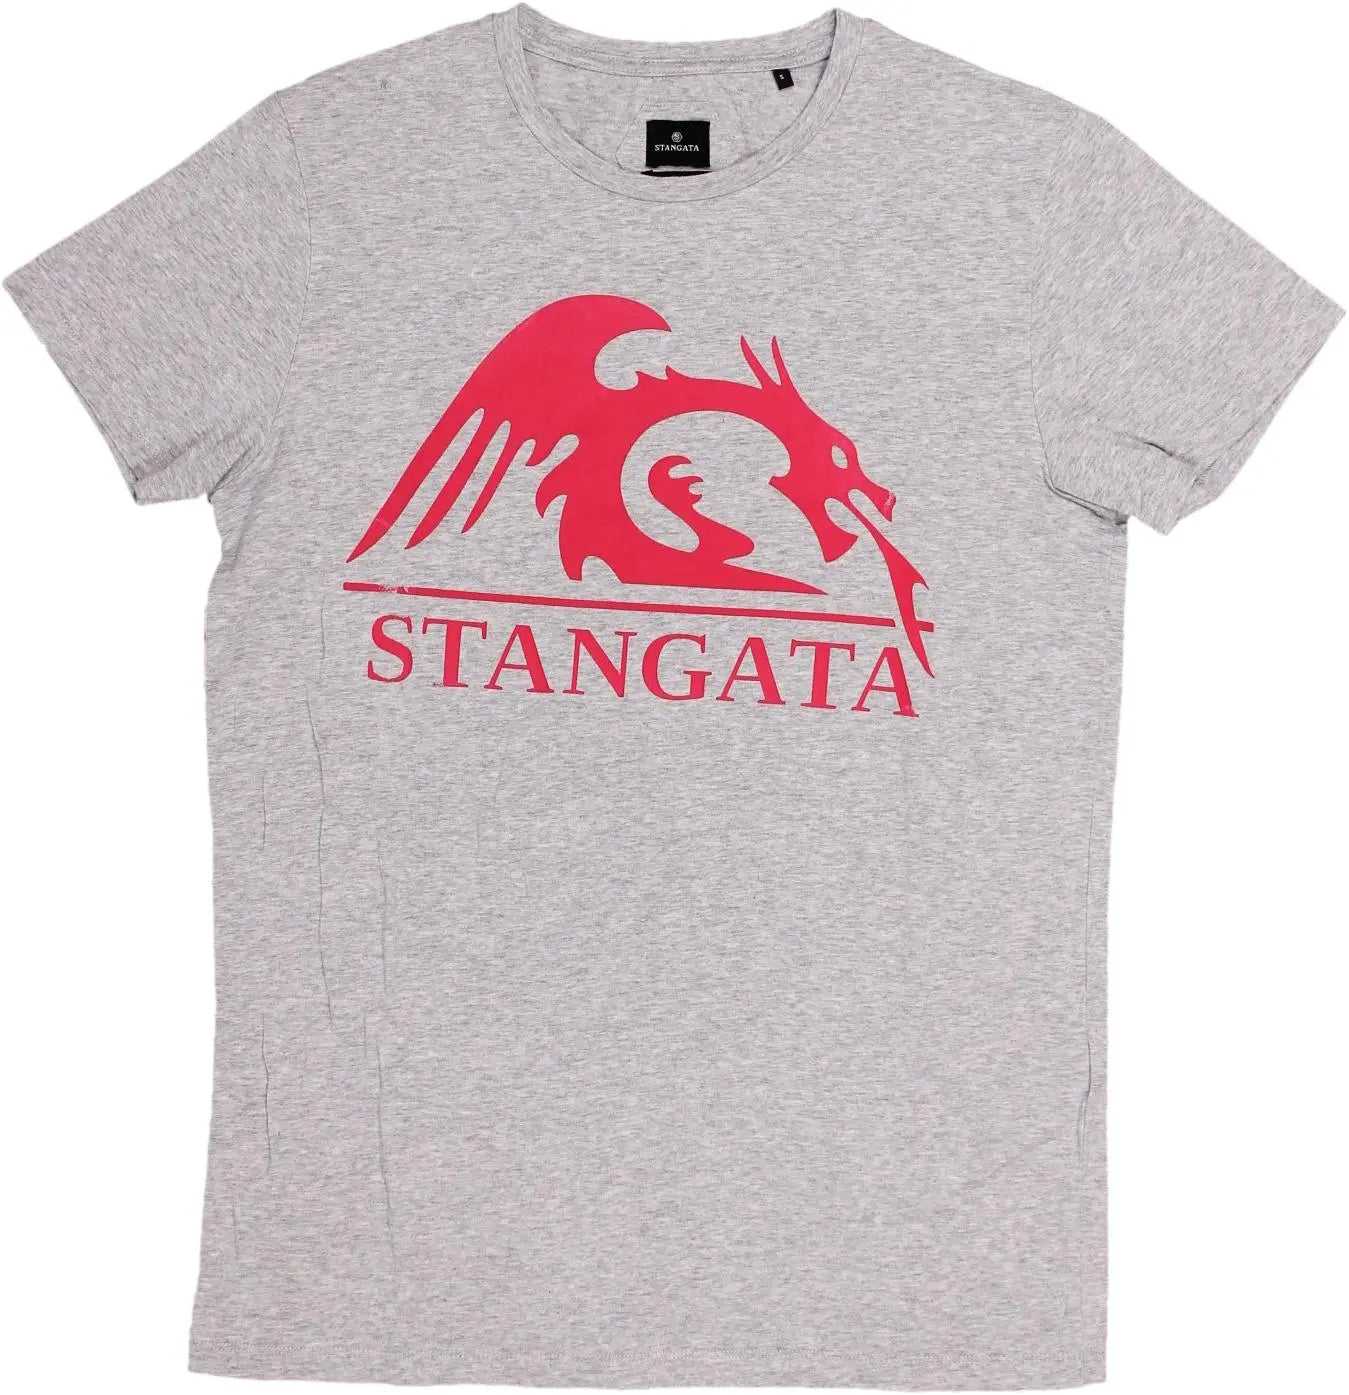 Stangata - BLUE2428- ThriftTale.com - Vintage and second handclothing